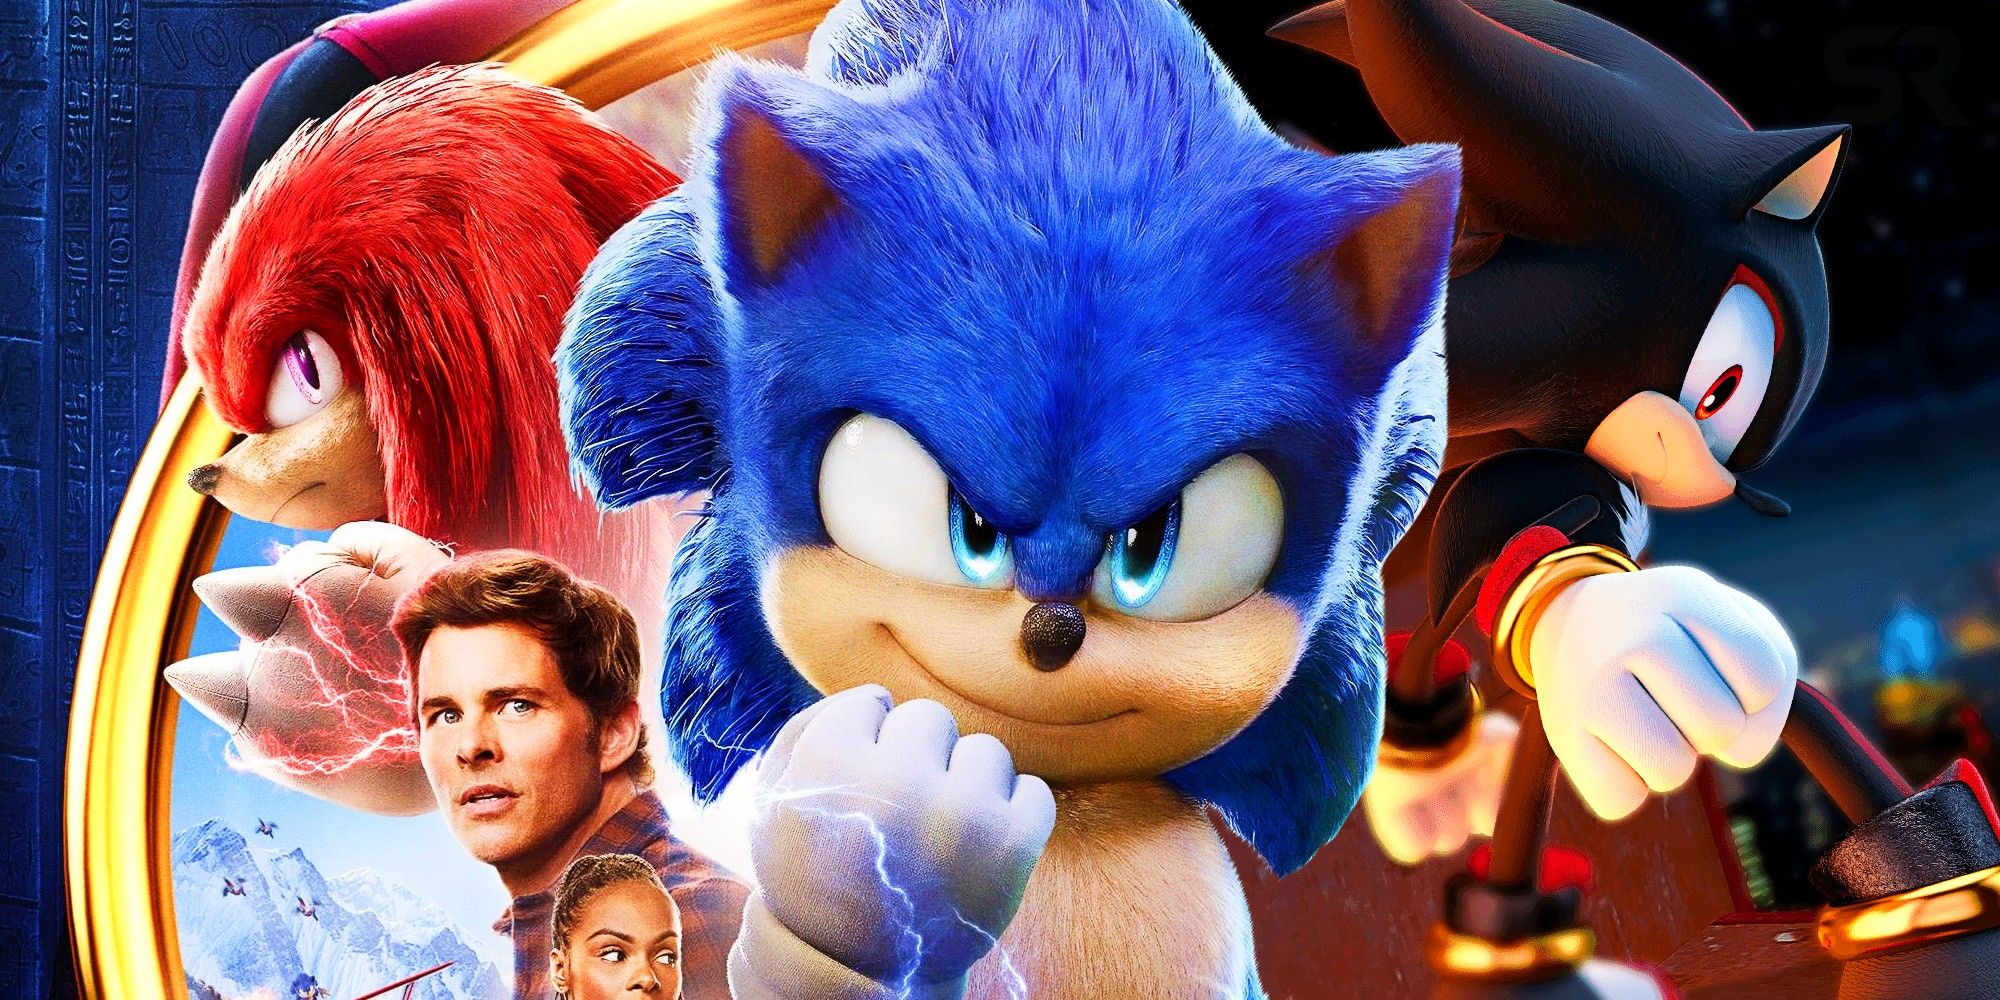 There's a new Sonic the Hedgehog game